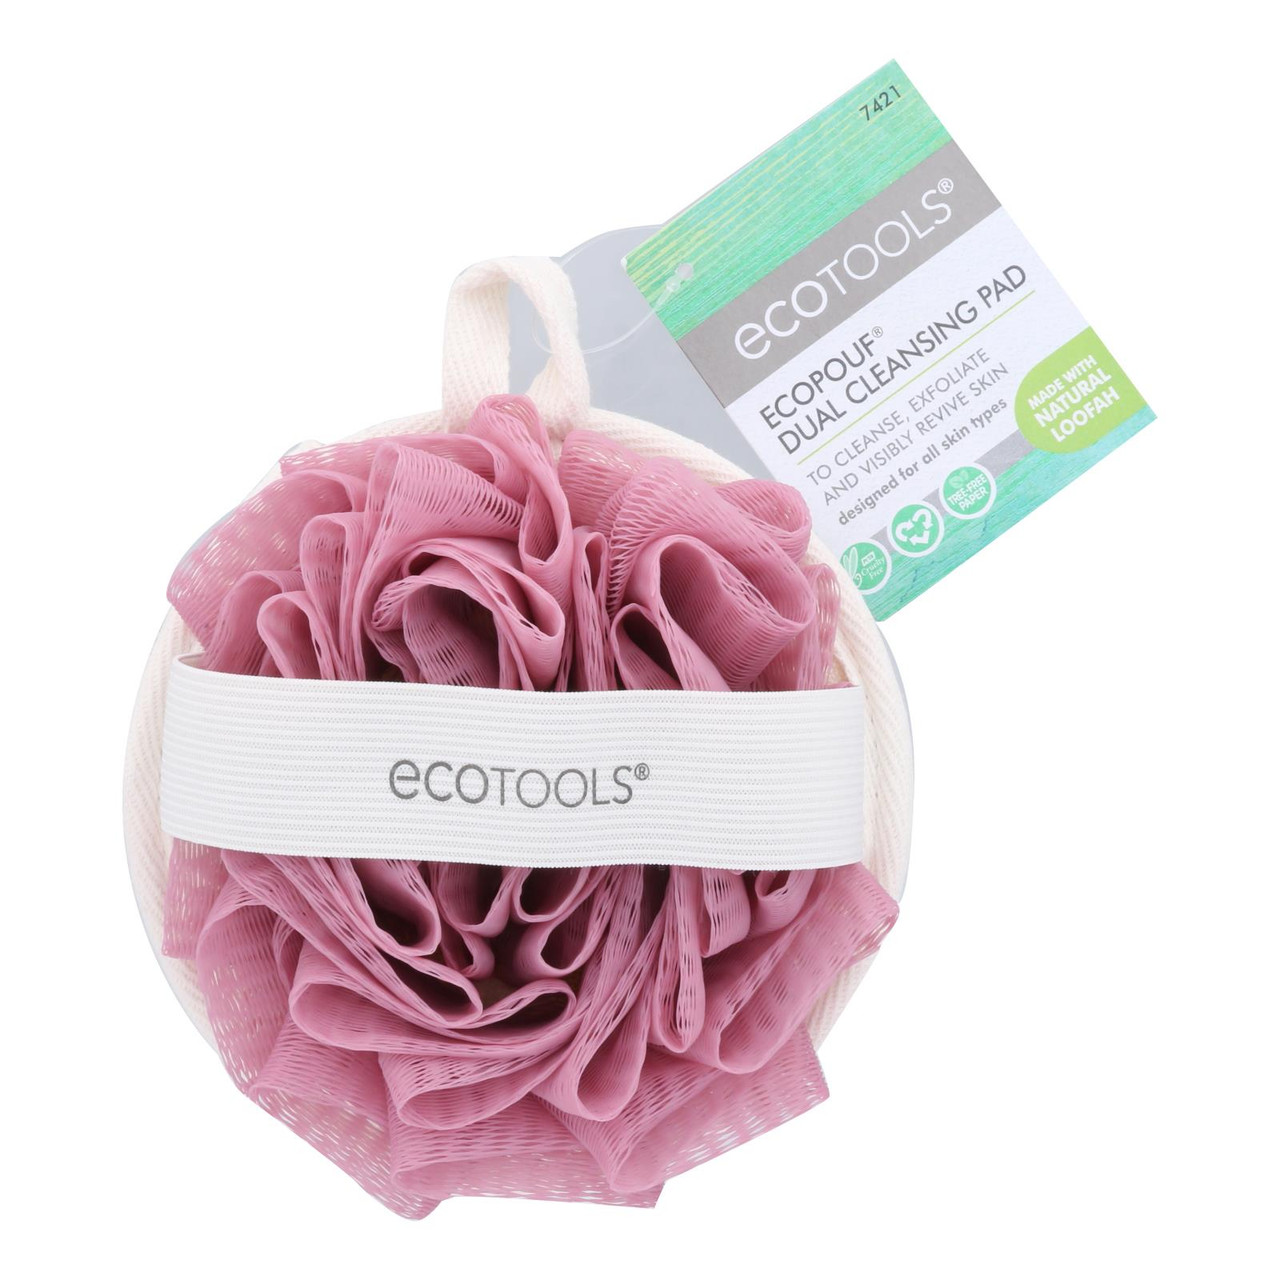 Ecotools Ecopouf Dual Cleansing Pad  - Case Of 4 - Ct